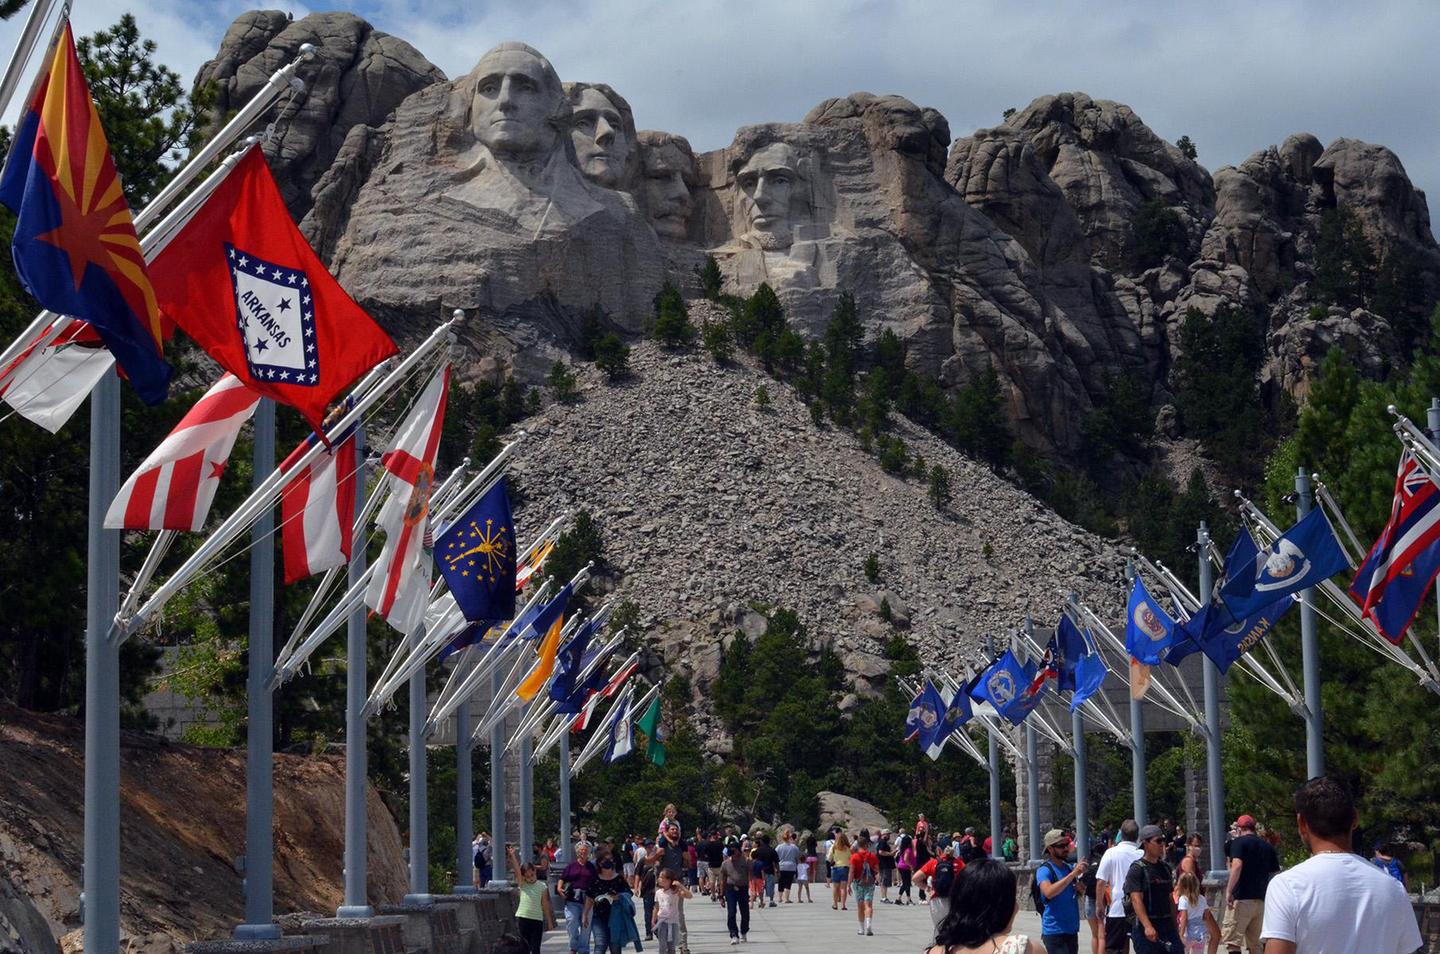 Mount Rushmore and the Avenue of FlagsVisitors walking along the Avenue of Flags with Mount Rushmore in the background.